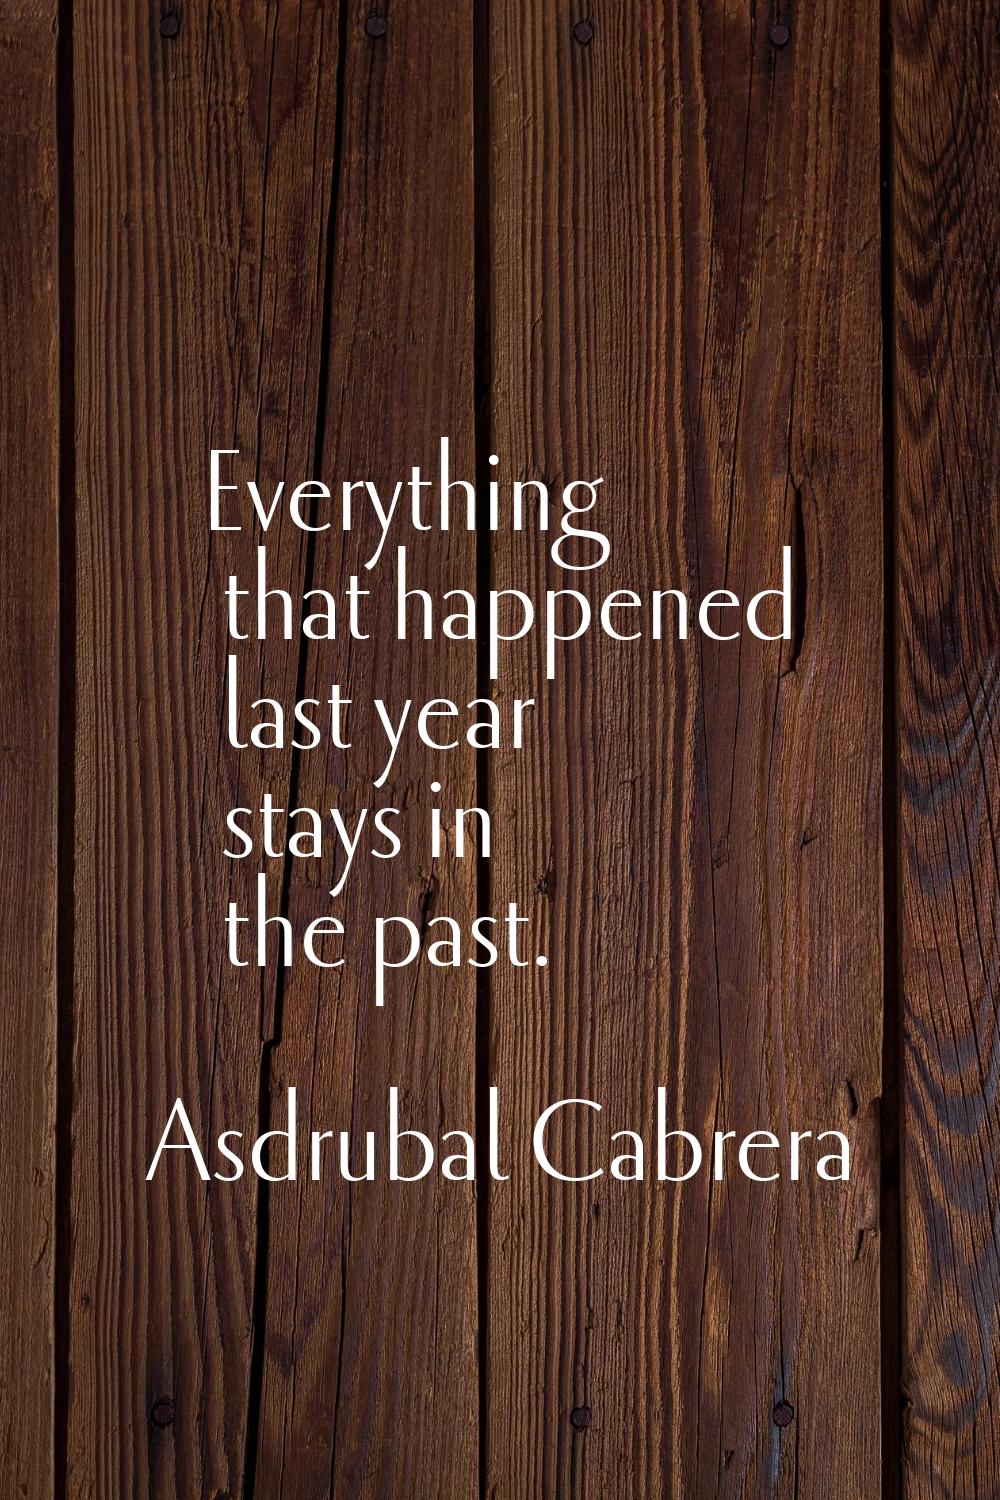 Everything that happened last year stays in the past.